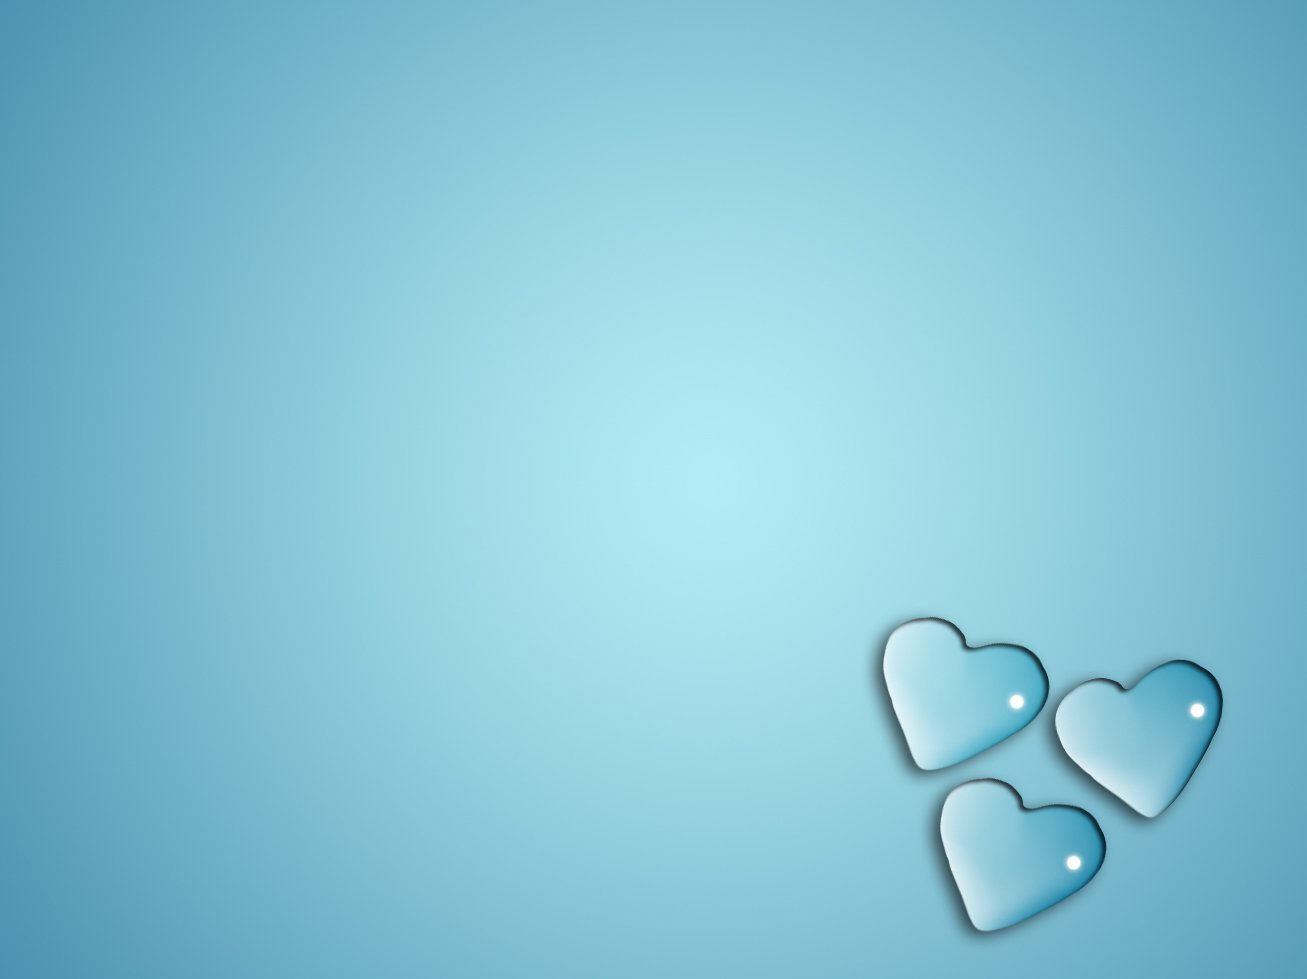 two hearts in the shape of a cut out on blue background